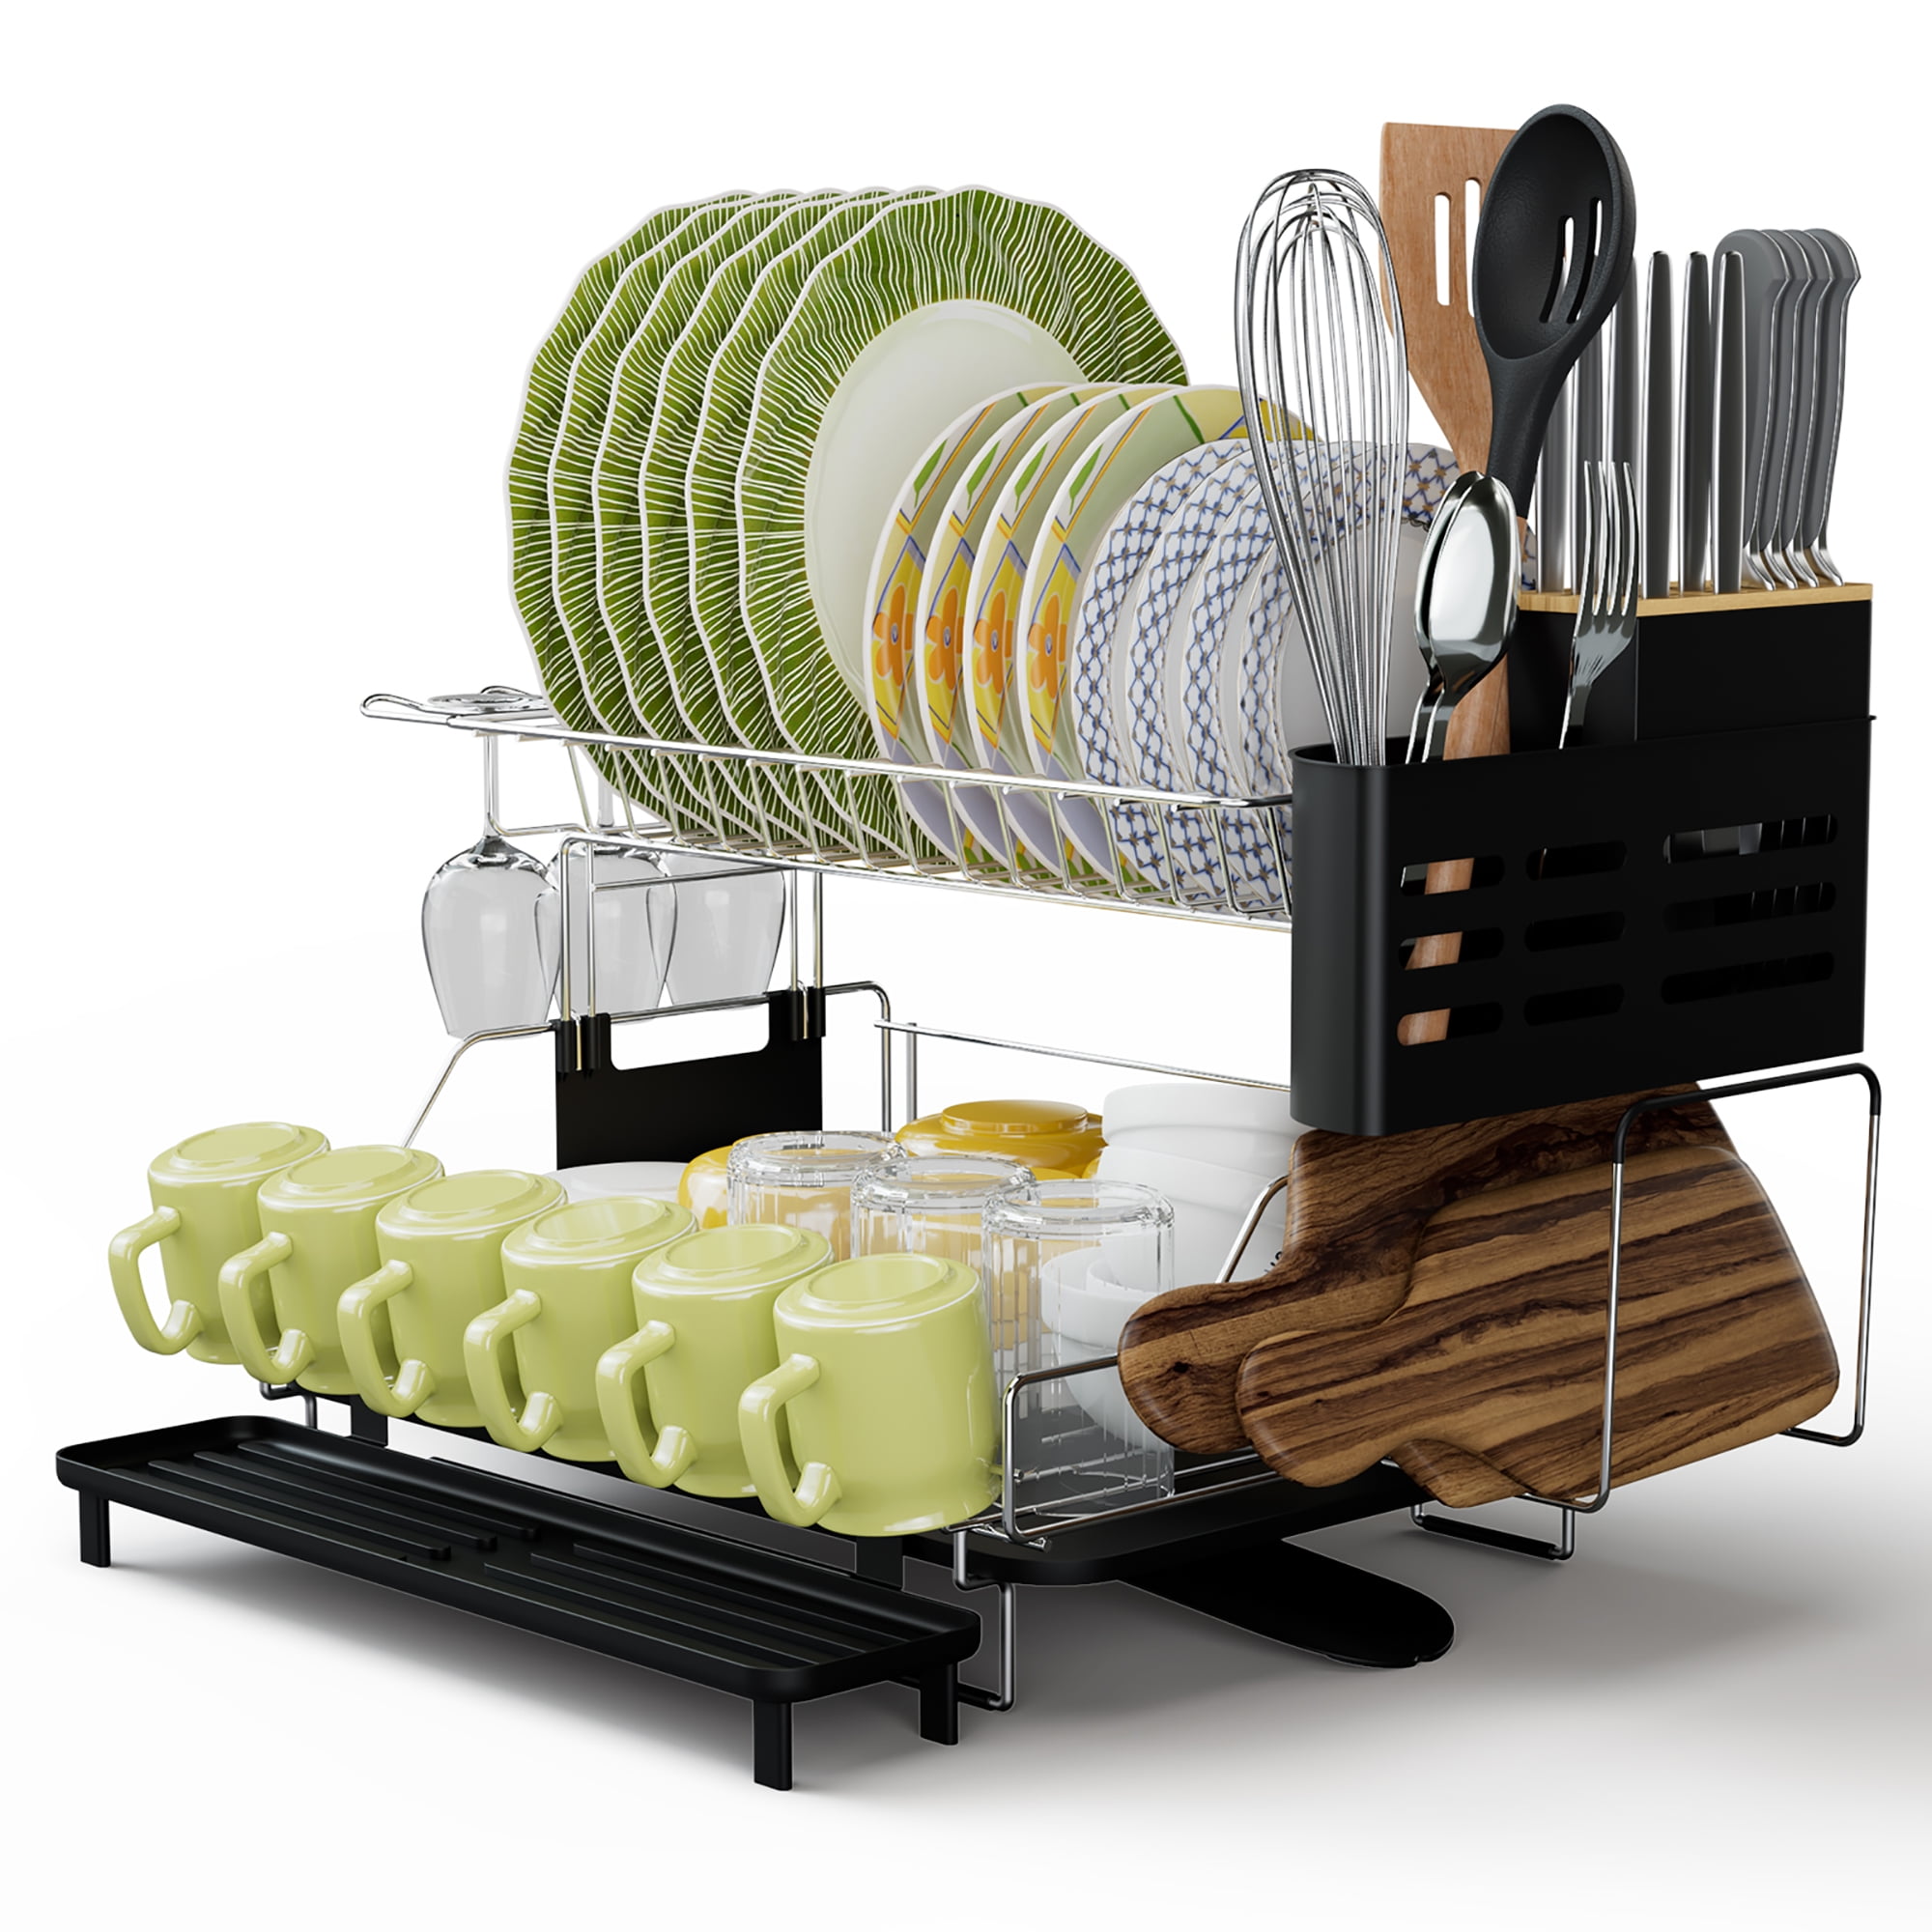  Simple Houseware 2-Tier Metal Dish Rack with Drainboard, Chrome  for Kitchen: Home & Kitchen